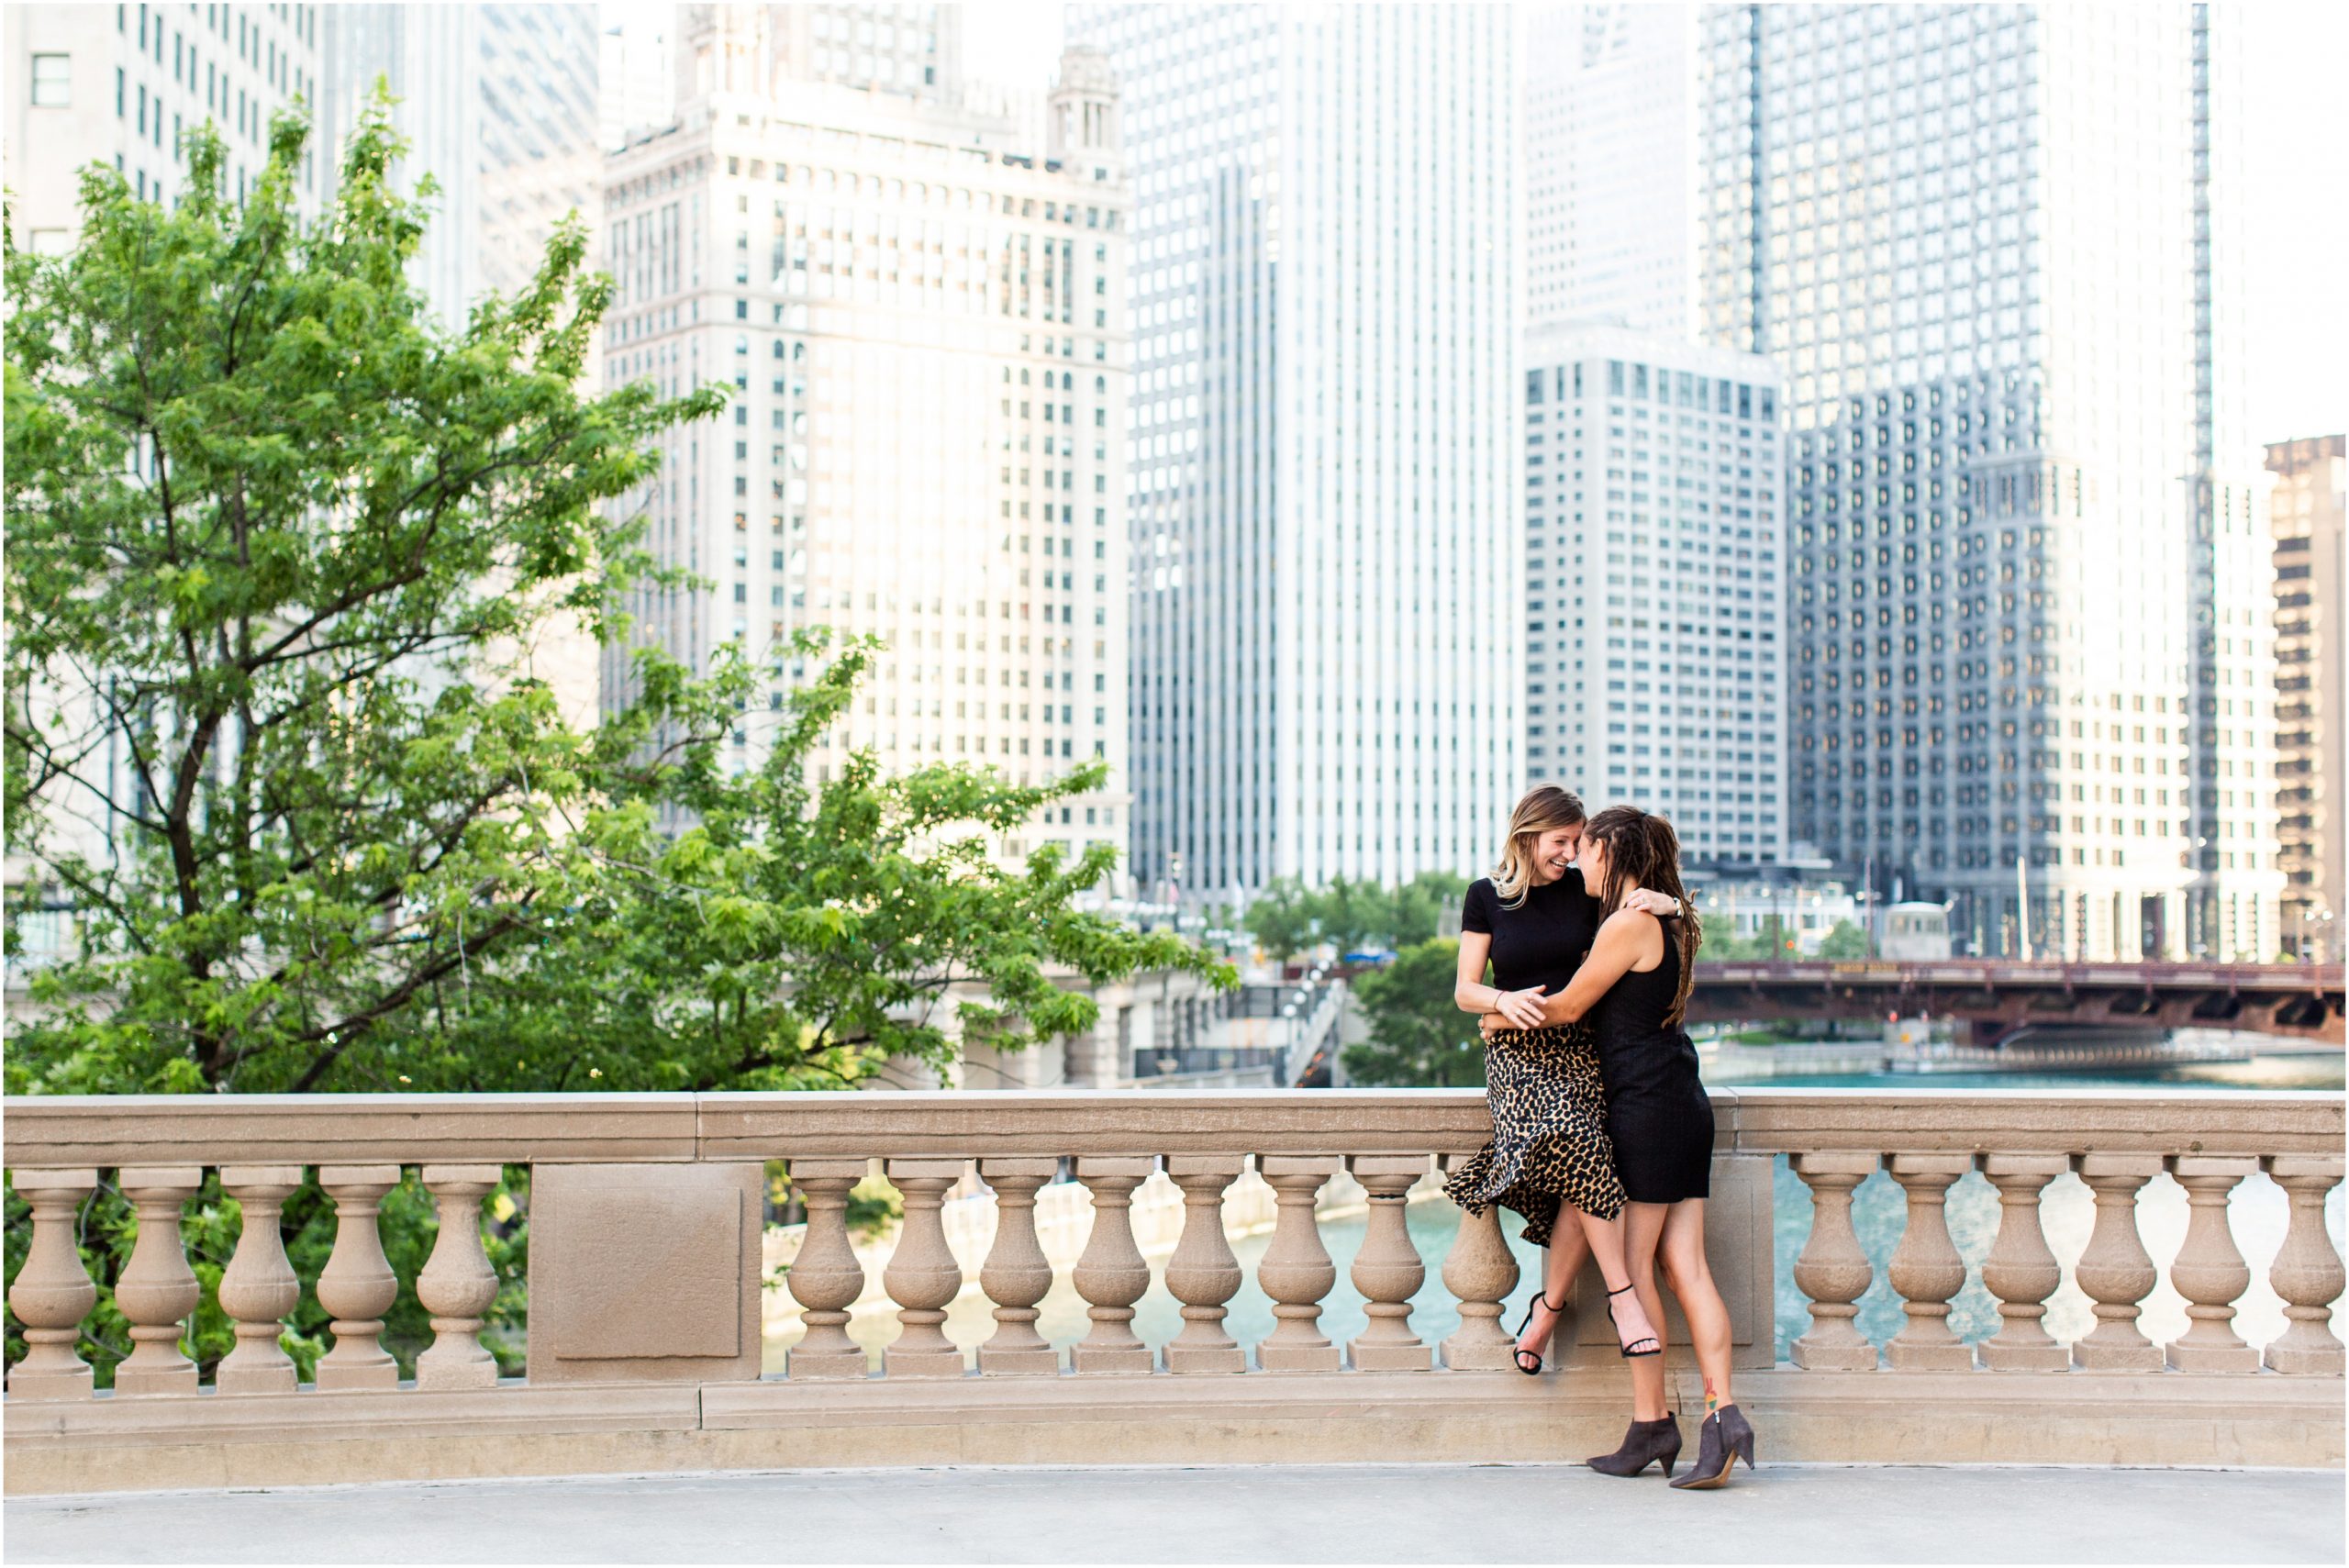 Downtown Chicago engagement portraits, Alexandra lee photography, chicago illinois, engagement photos, engagement photography, Wrigley Building, same sex couple, near the River Walk, same sex couple poses, how to pose same sex couple